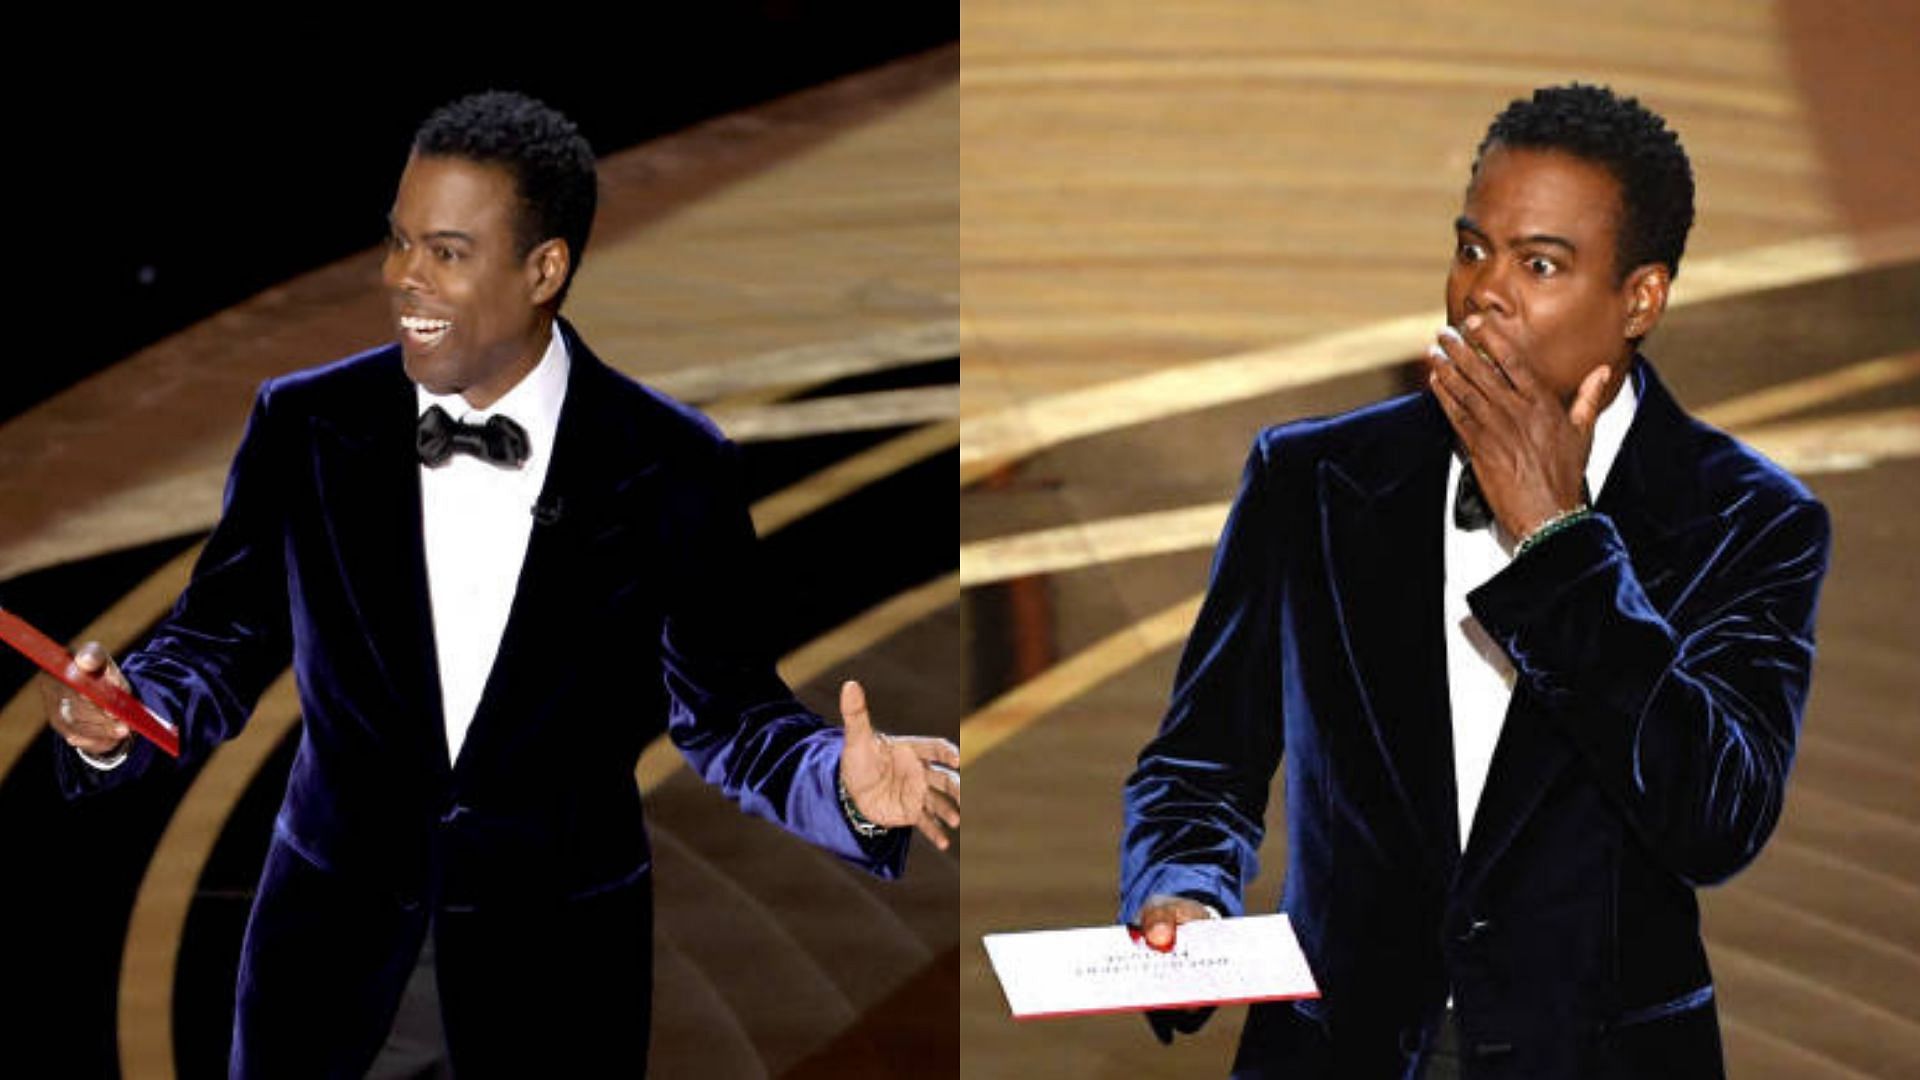 Chris Rock at the 2022 Oscars presenting the award for Best Documentary moments before the Will Smith fiasco (Image via  Neilson Barnard/Getty Images)